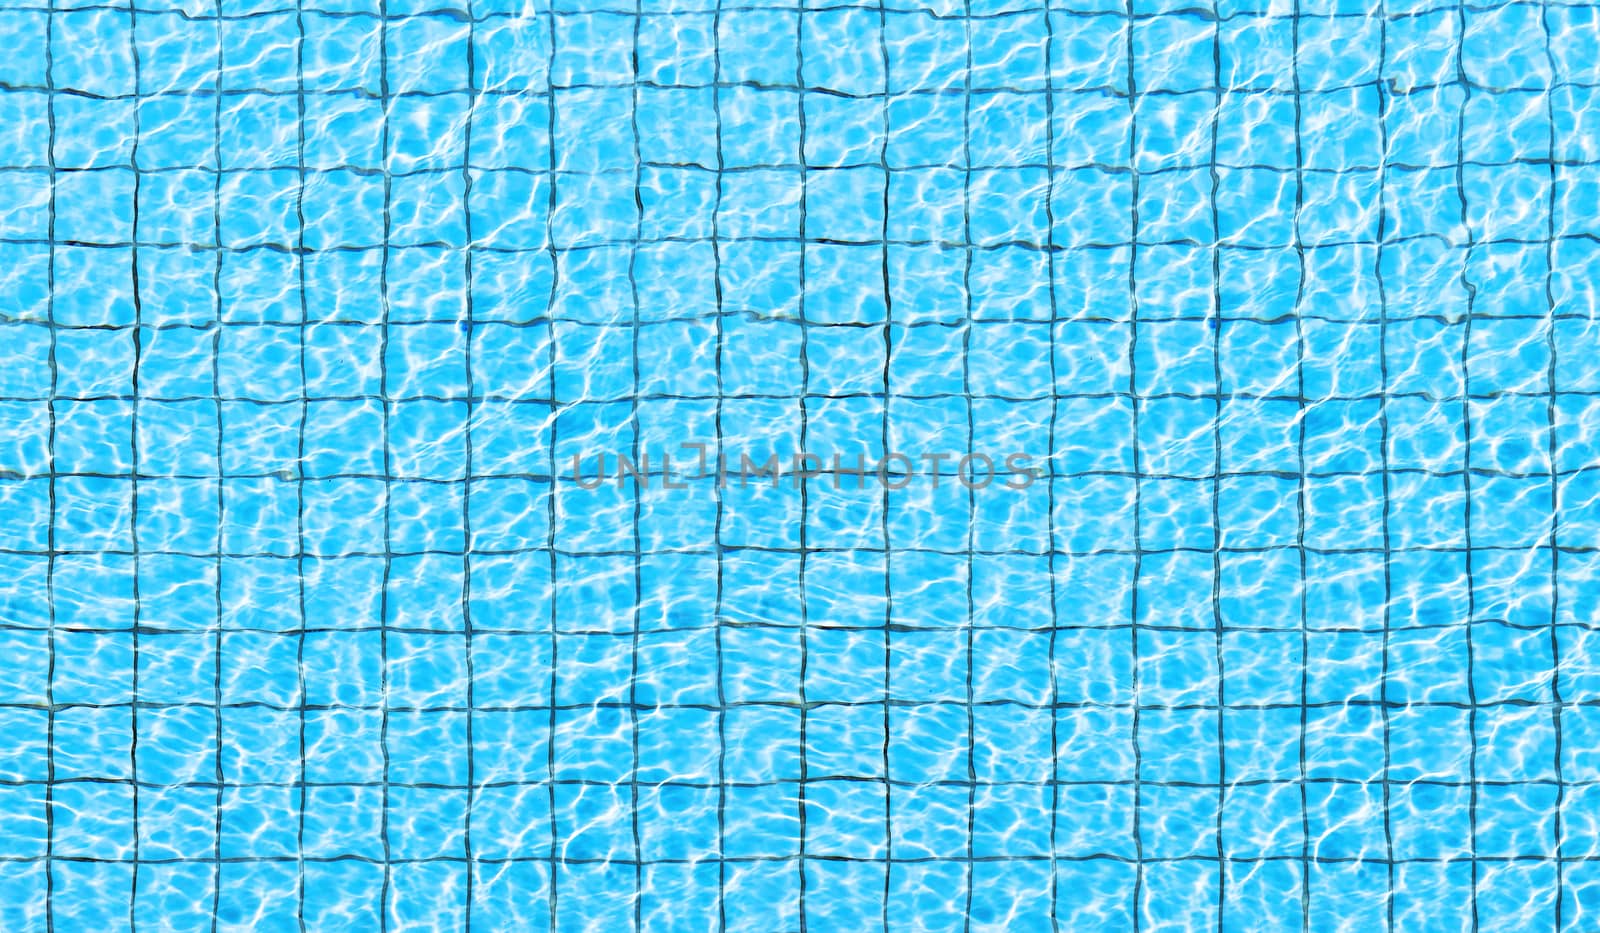 Top view of swimming pool bottom caustics ripple and flow with w by Surasak